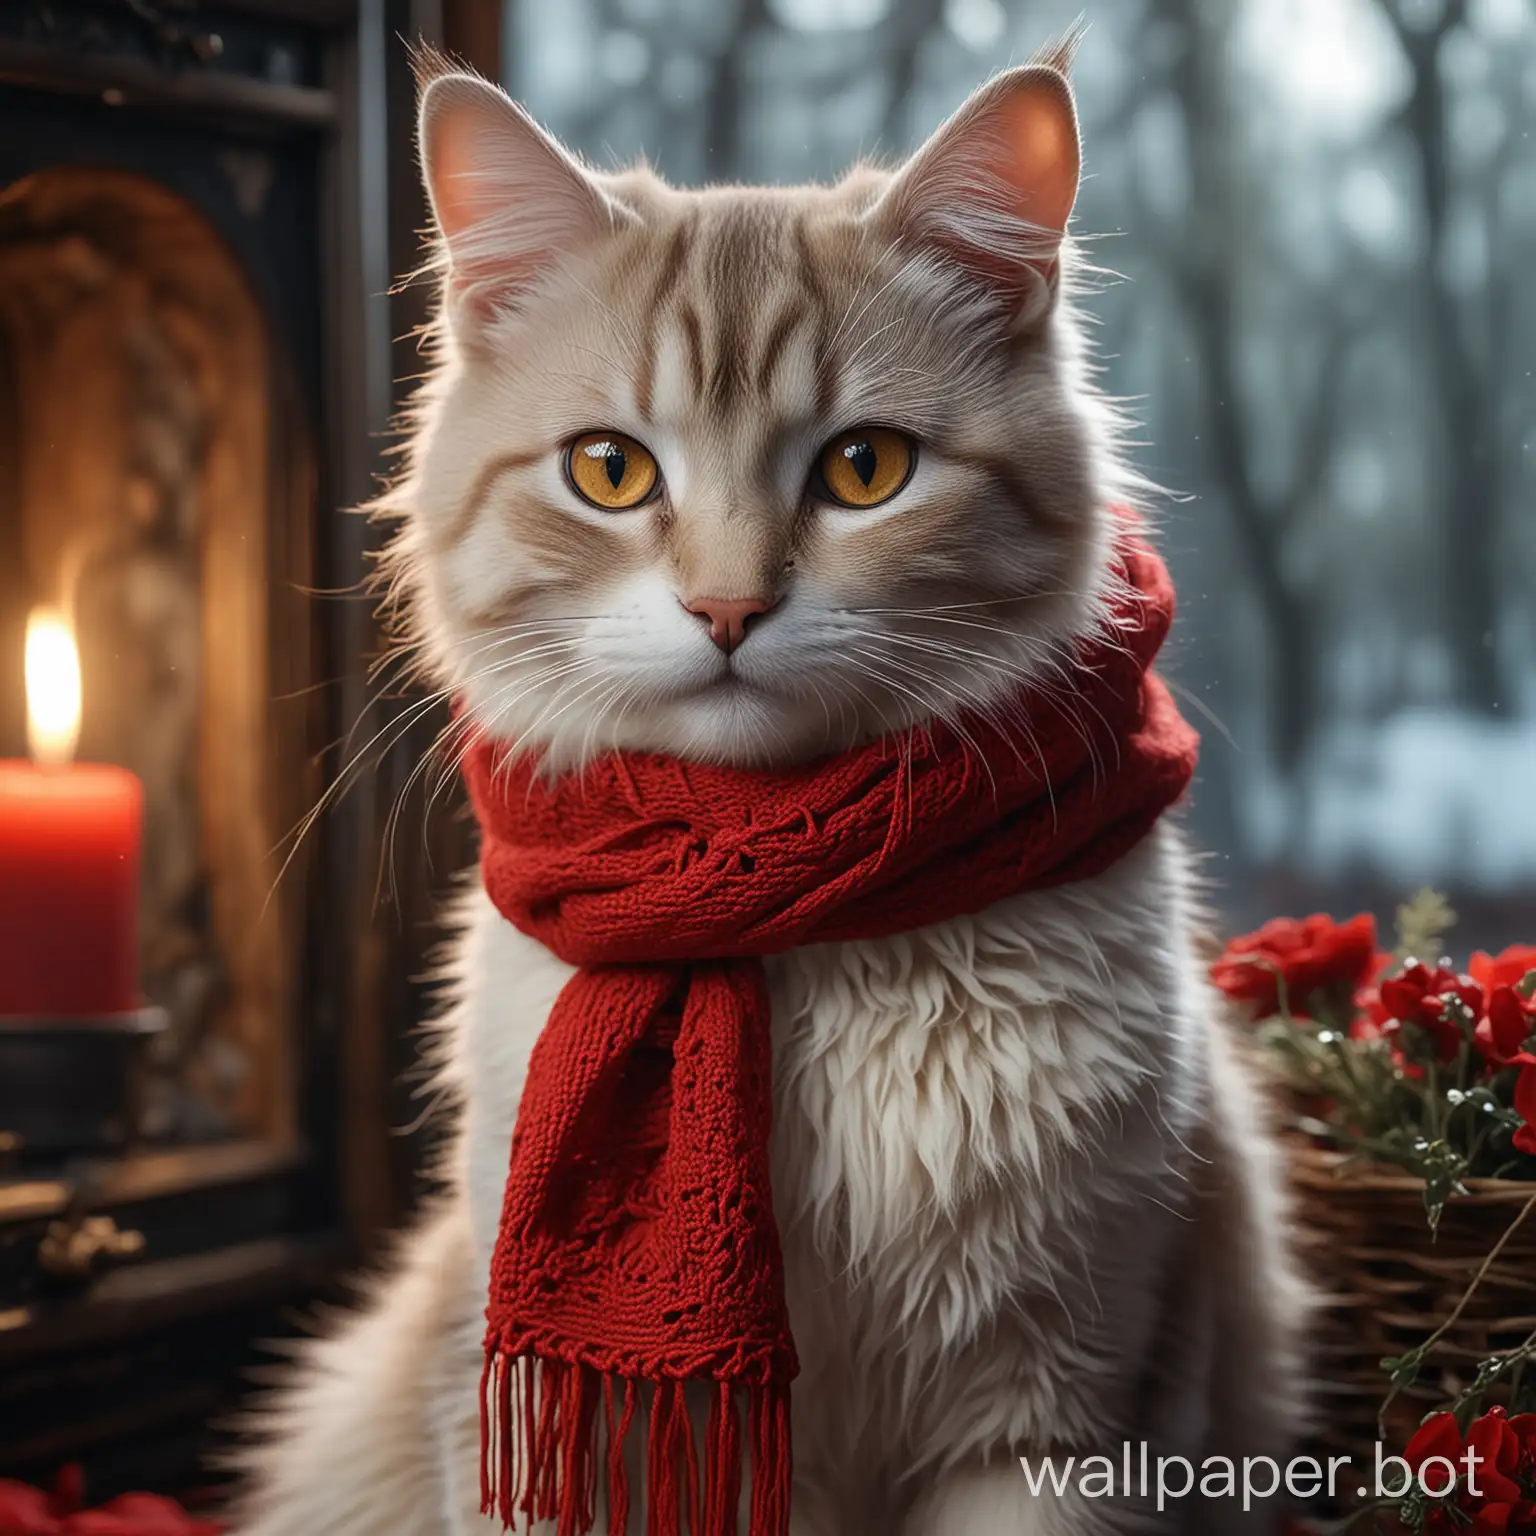 Cozy-Cottagepunk-RedScarf-Cat-in-Hygge-Atmosphere